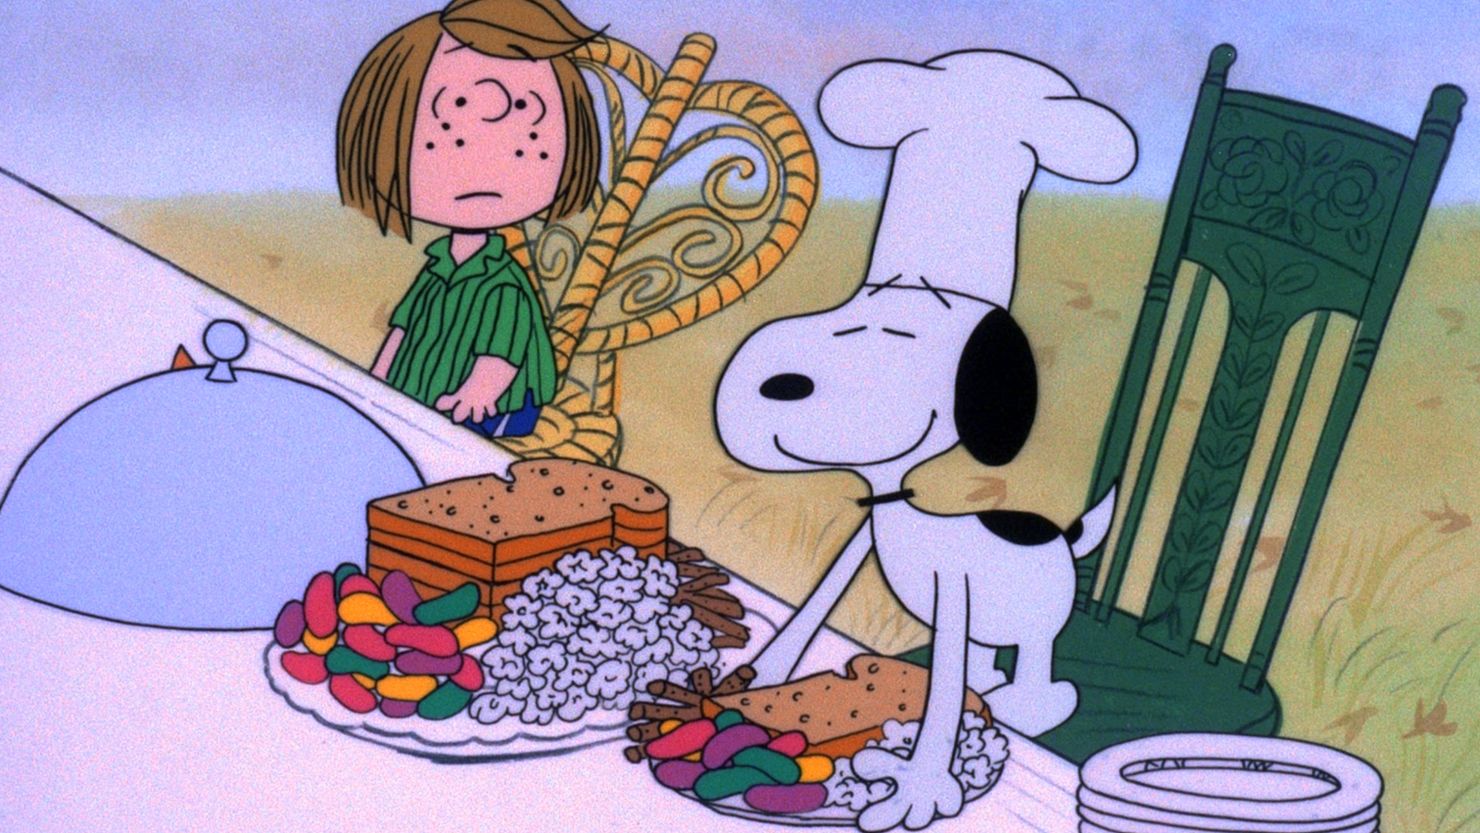 A CHARLIE BROWN THANKSGIVING - The Walt Disney Television via Getty Images Television Network will celebrate the start of the holiday season with the classic special, "A Charlie Brown Thanksgiving," MONDAY, NOVEMBER 20 (8:00-8:30 & 8:30-9:00 p.m., ET), on the Disney General Entertainment Content via Getty Images Television Network. In the 1973 special "A Charlie Brown Thanksgiving," Charlie Brown wants to do something special for the gang. However the dinner he arranges is a disaster when caterers Snoopy and Woodstock prepare toast and popcorn as the main dish. Humiliated, it will take all of Marcie's persuasive powers to salvage the holiday for Charlie Brown.  (Photo by ABC Photo Archives/Disney General Entertainment Content via Getty Images)